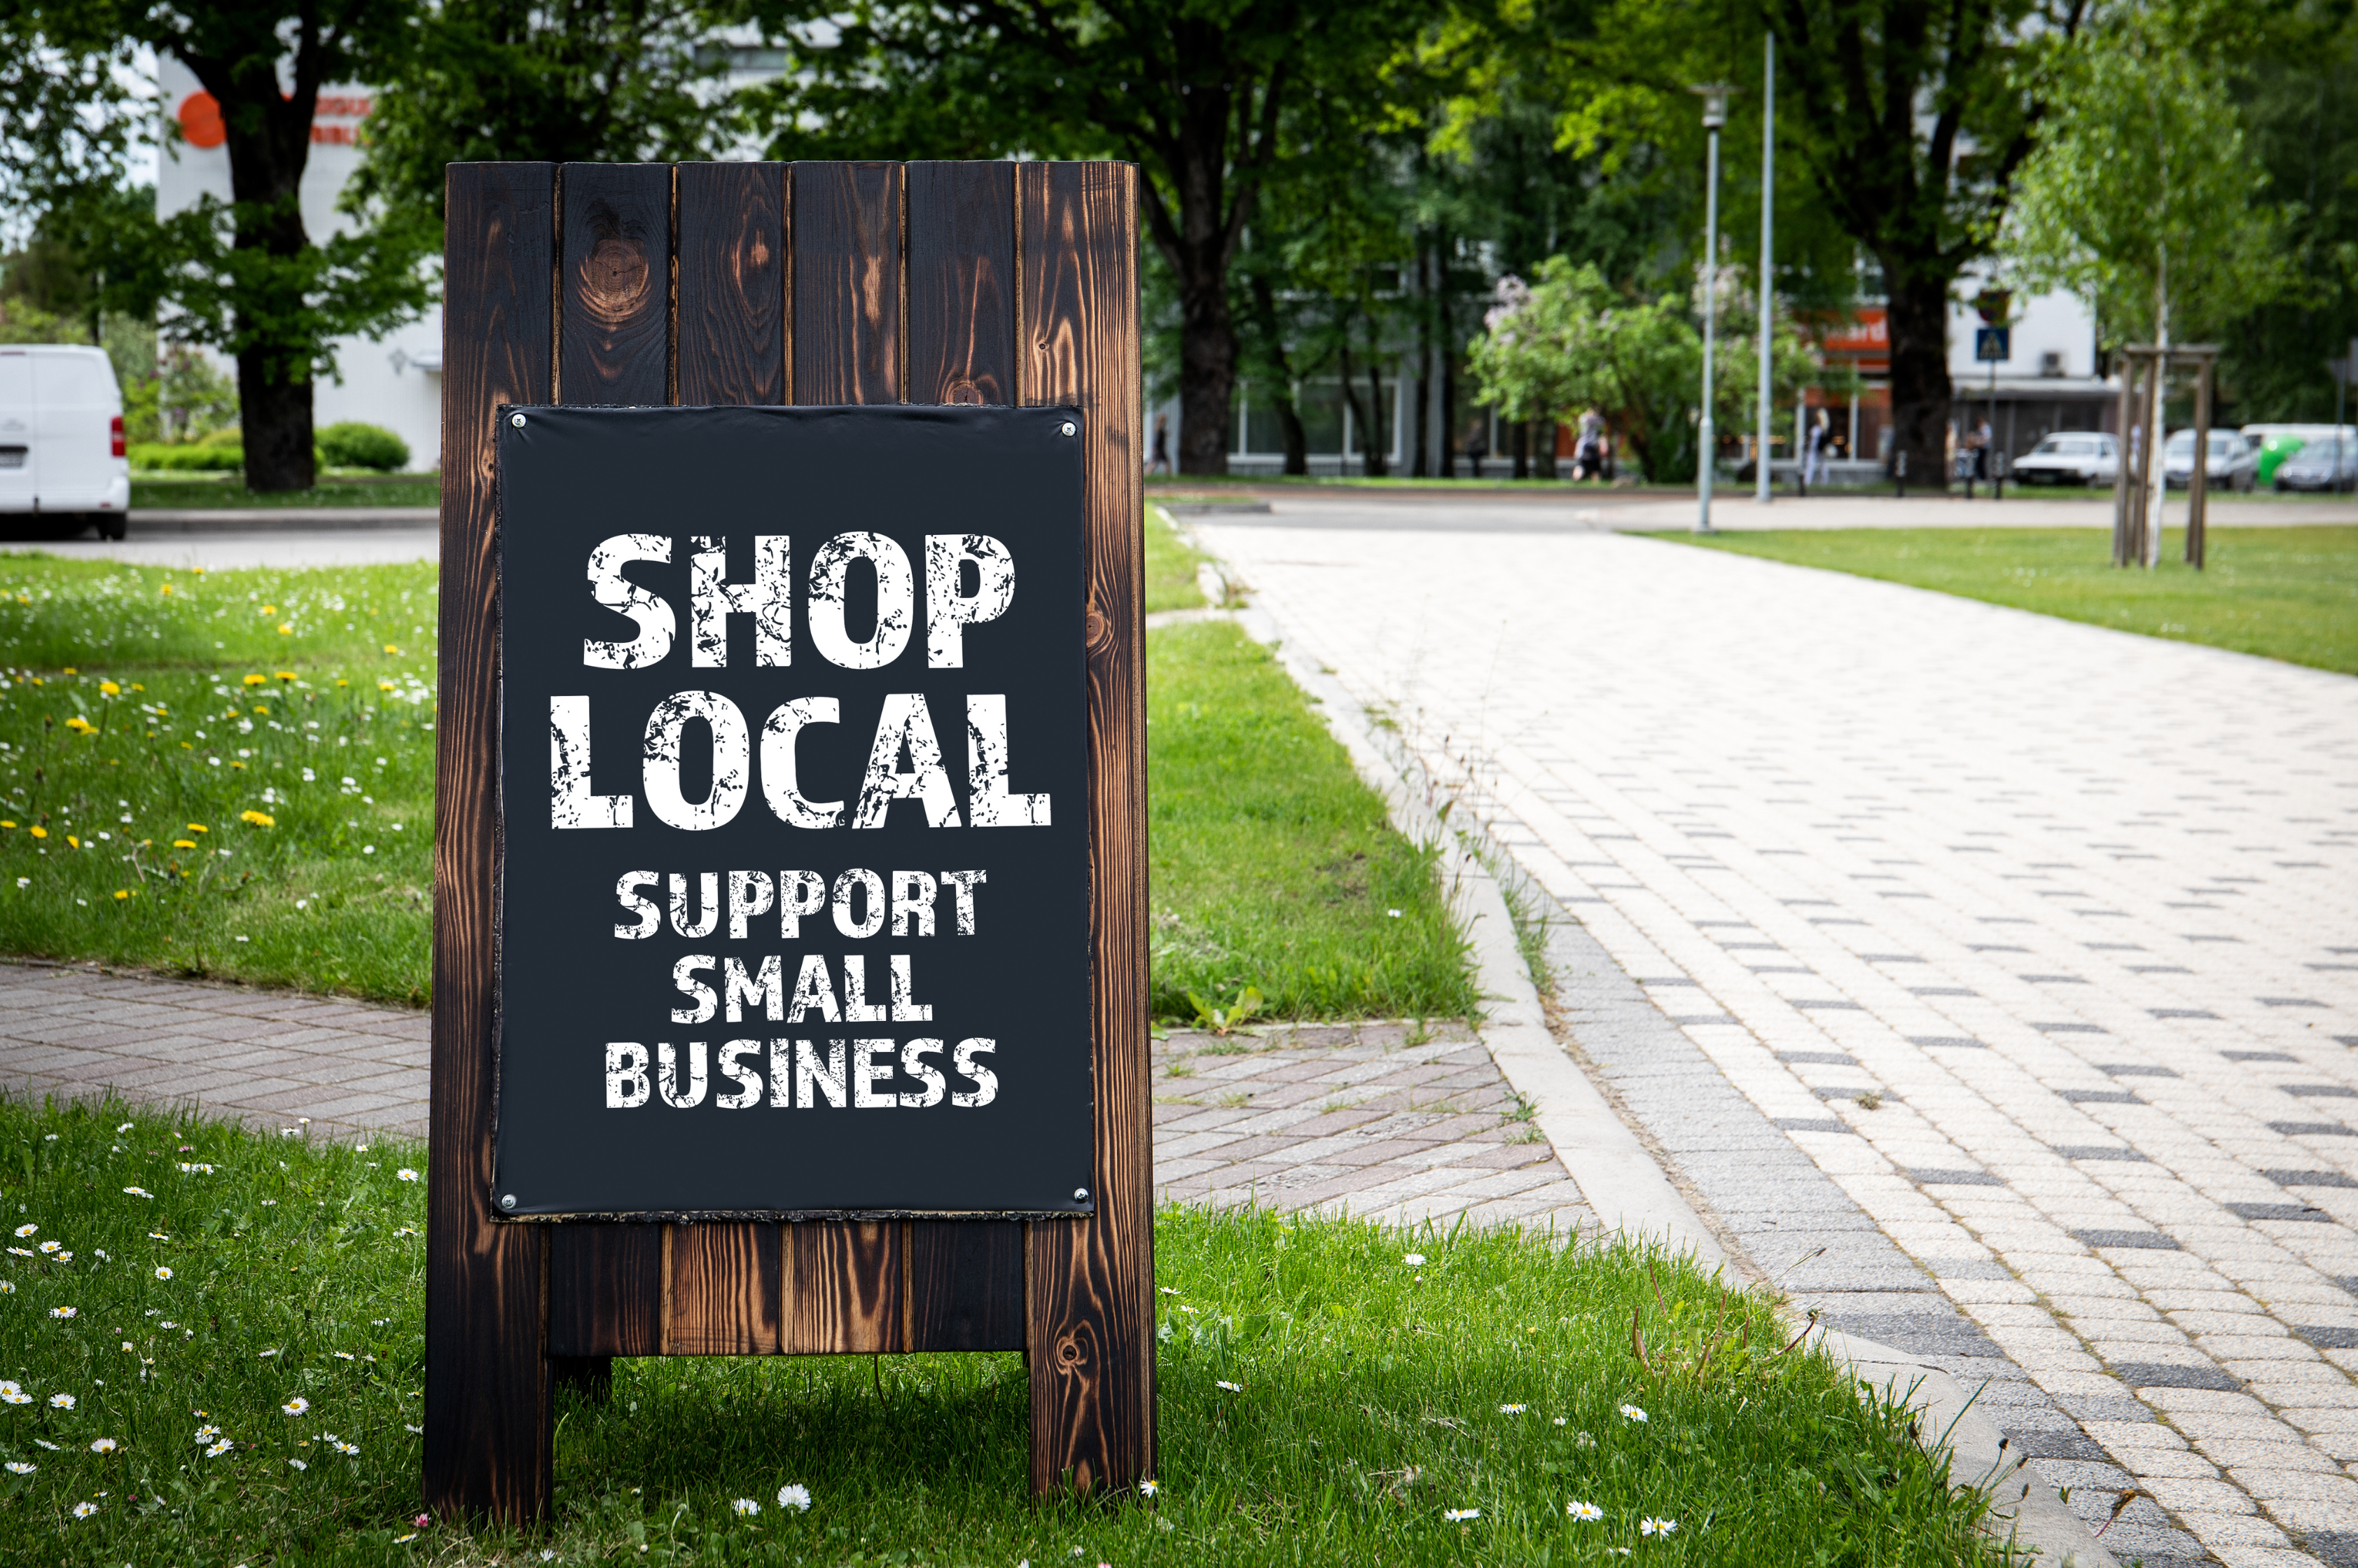 A sidewalk sign encouraging people to shop at local businesses, displayed on a paved walkway with a grassy area and trees in the background